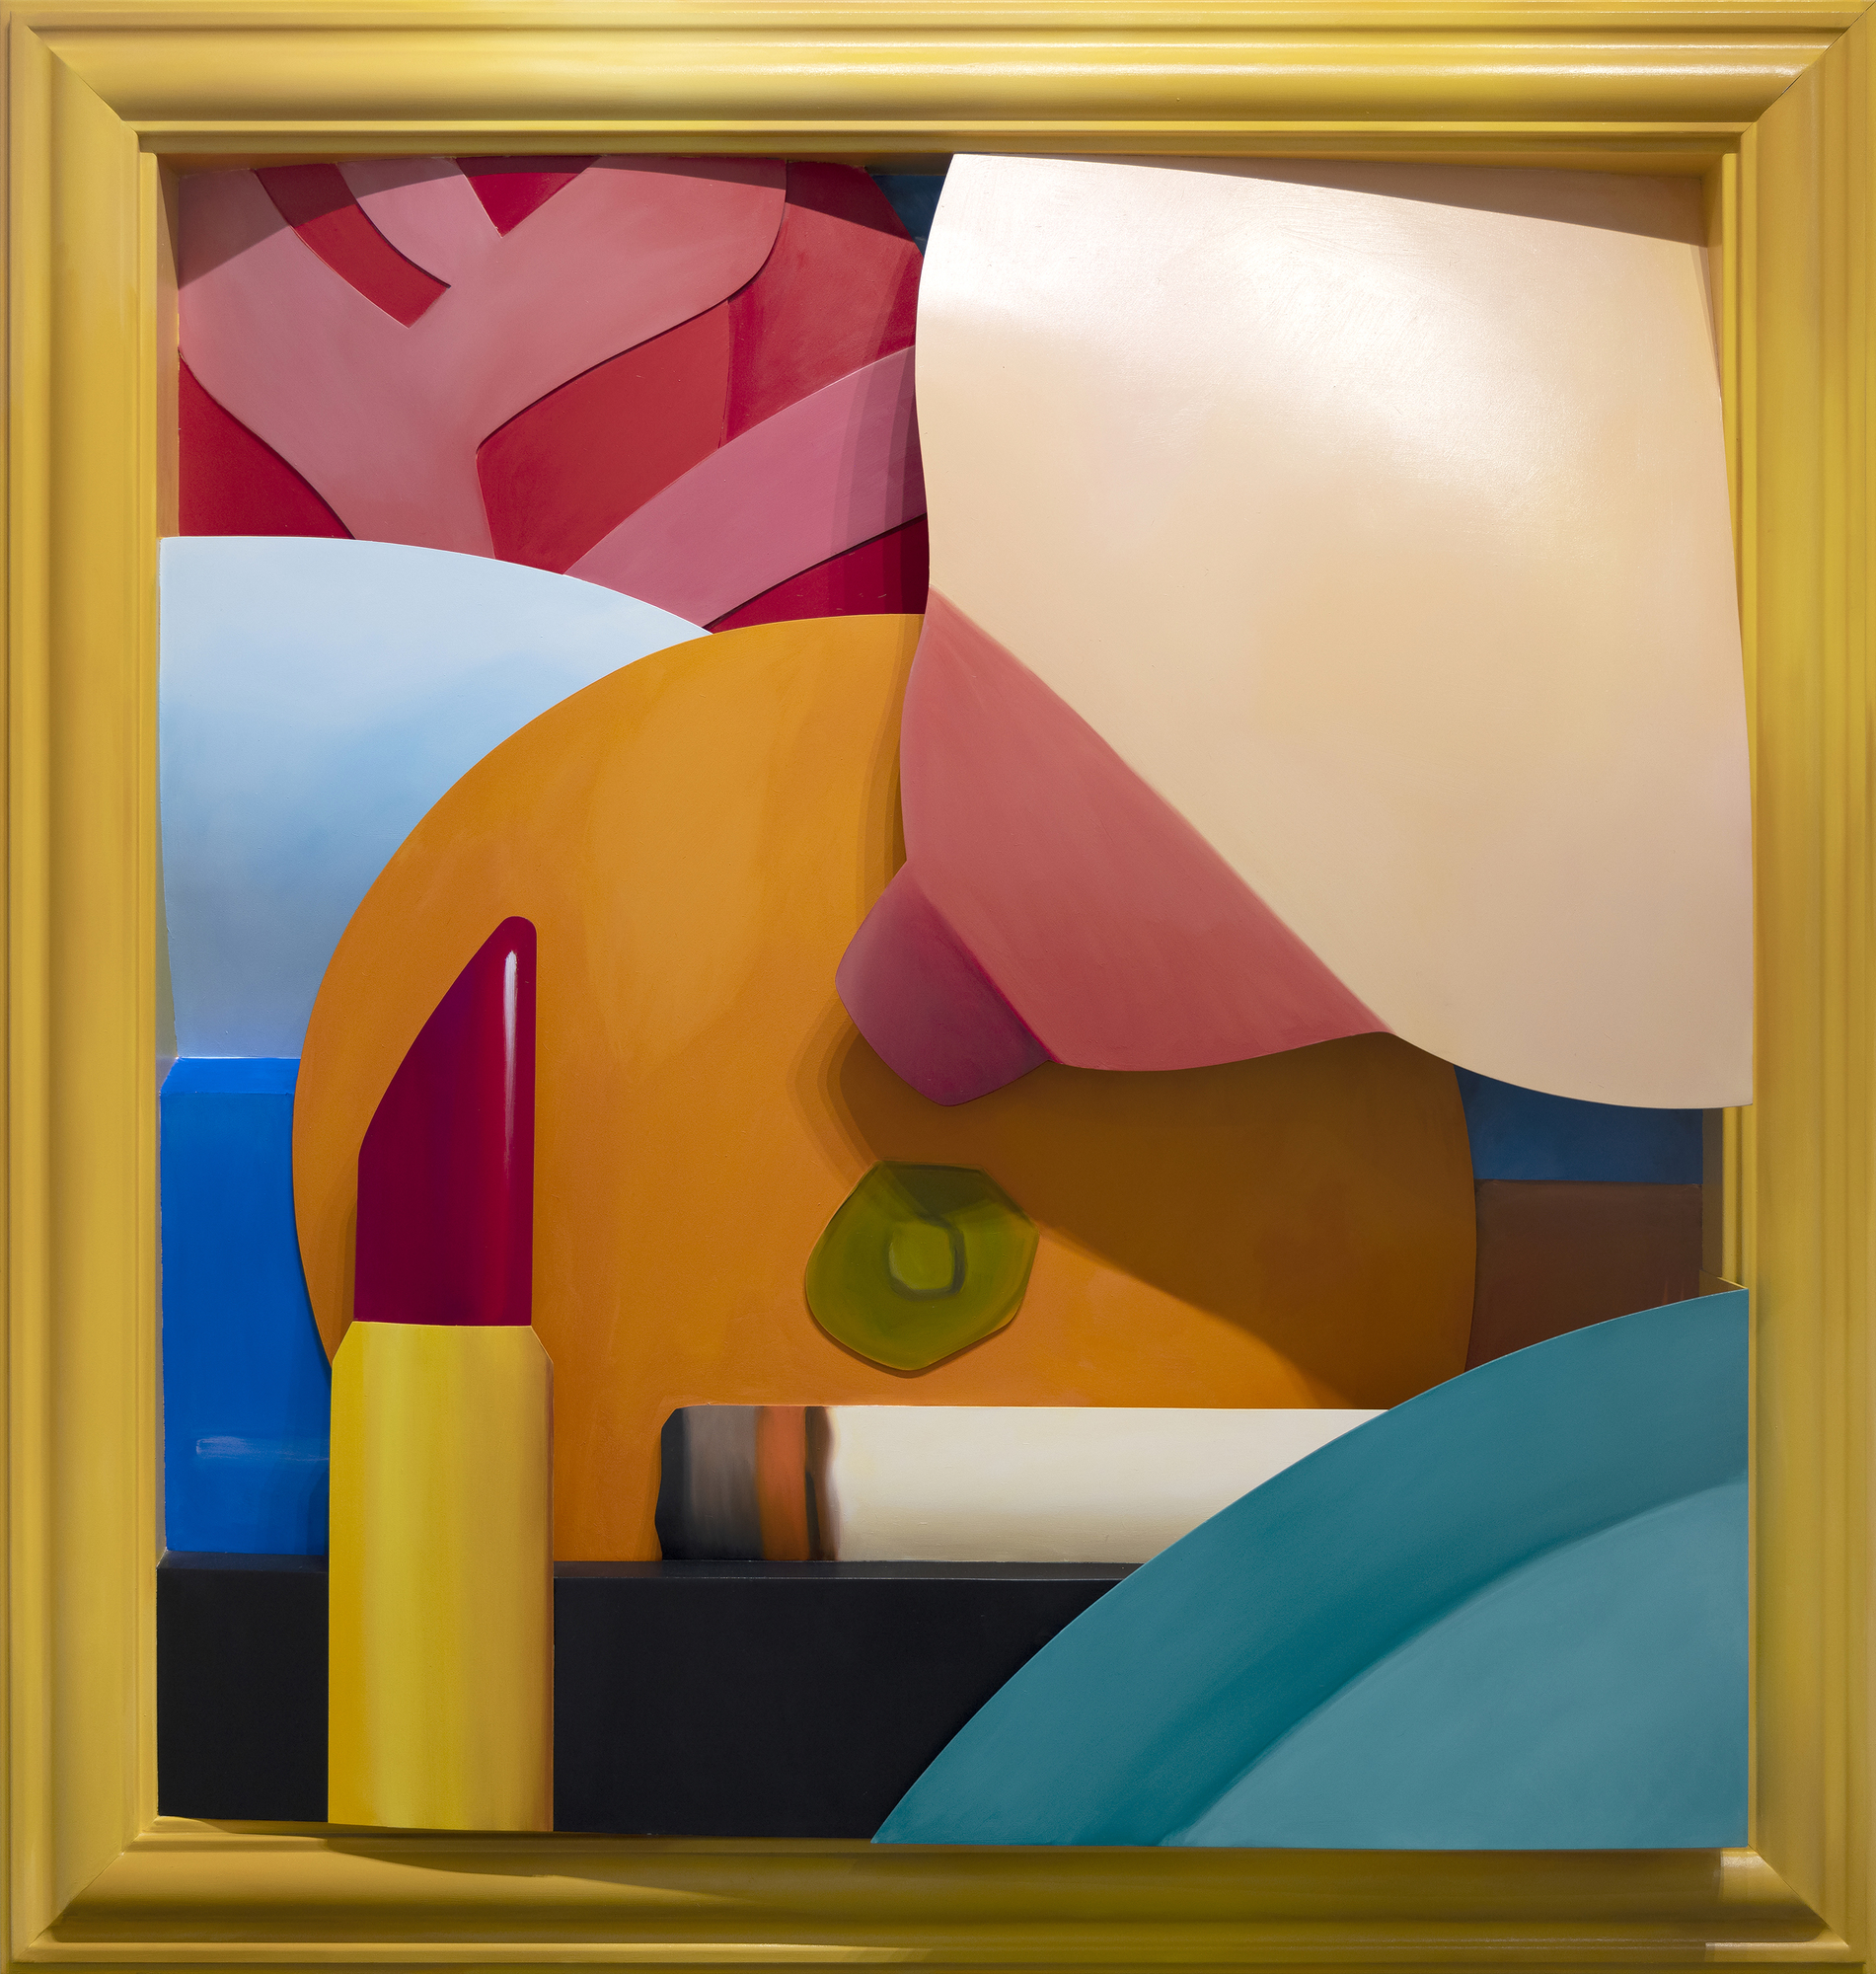 Tom Wesselmann was a leader of the Pop Art movement. He is best remembered for large-scale works, including his Great American Nude series, in which Wesselmann combined sensual imagery with everyday objects depicted in bold and vibrant colors. As he developed in his practice, Wesselmann grew beyond the traditional canvas format and began creating shaped canvases and aluminum cut-outs that often functioned as sculptural drawings. Continuing his interest in playing with scale, Wesselmann began focusing more closely on the body parts that make up his nudes. He created his Mouth series and his Bedroom series in which particular elements, rather than the entire sitter, become the focus.<br> <br>Bedroom Breast (2004) combines these techniques, using vivid hues painted on cut-out aluminum. The work was a special commission for a private collector's residence, and the idea of a bedroom breast piece in oil on 3-D cut-out aluminum was one Wesselmann had been working with for many years prior to this work's creation. The current owner of the piece believed in Wesselmann's vision and loved the idea of bringing the subject to his home.<br><br>It's one of, if not the last, piece Wesselmann completed before he passed away. The present work is the only piece of its kind - there has never been an oil on aluminum in 3D at this scale or of this iconography.  